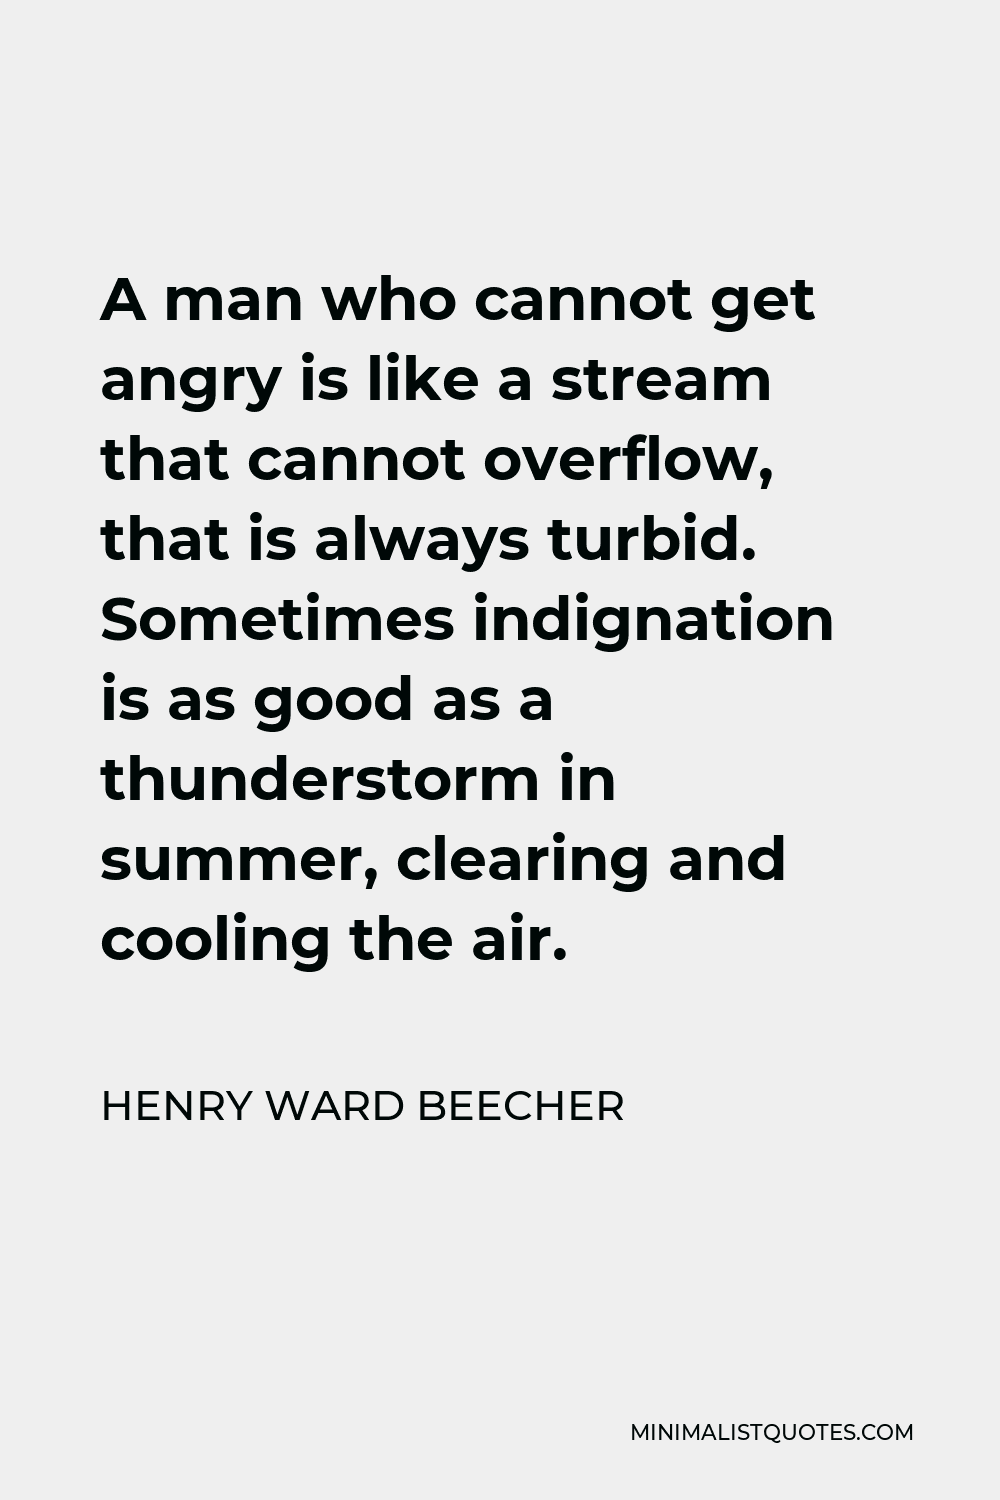 Henry Ward Beecher Quote - A man who cannot get angry is like a stream that cannot overflow, that is always turbid. Sometimes indignation is as good as a thunderstorm in summer, clearing and cooling the air.